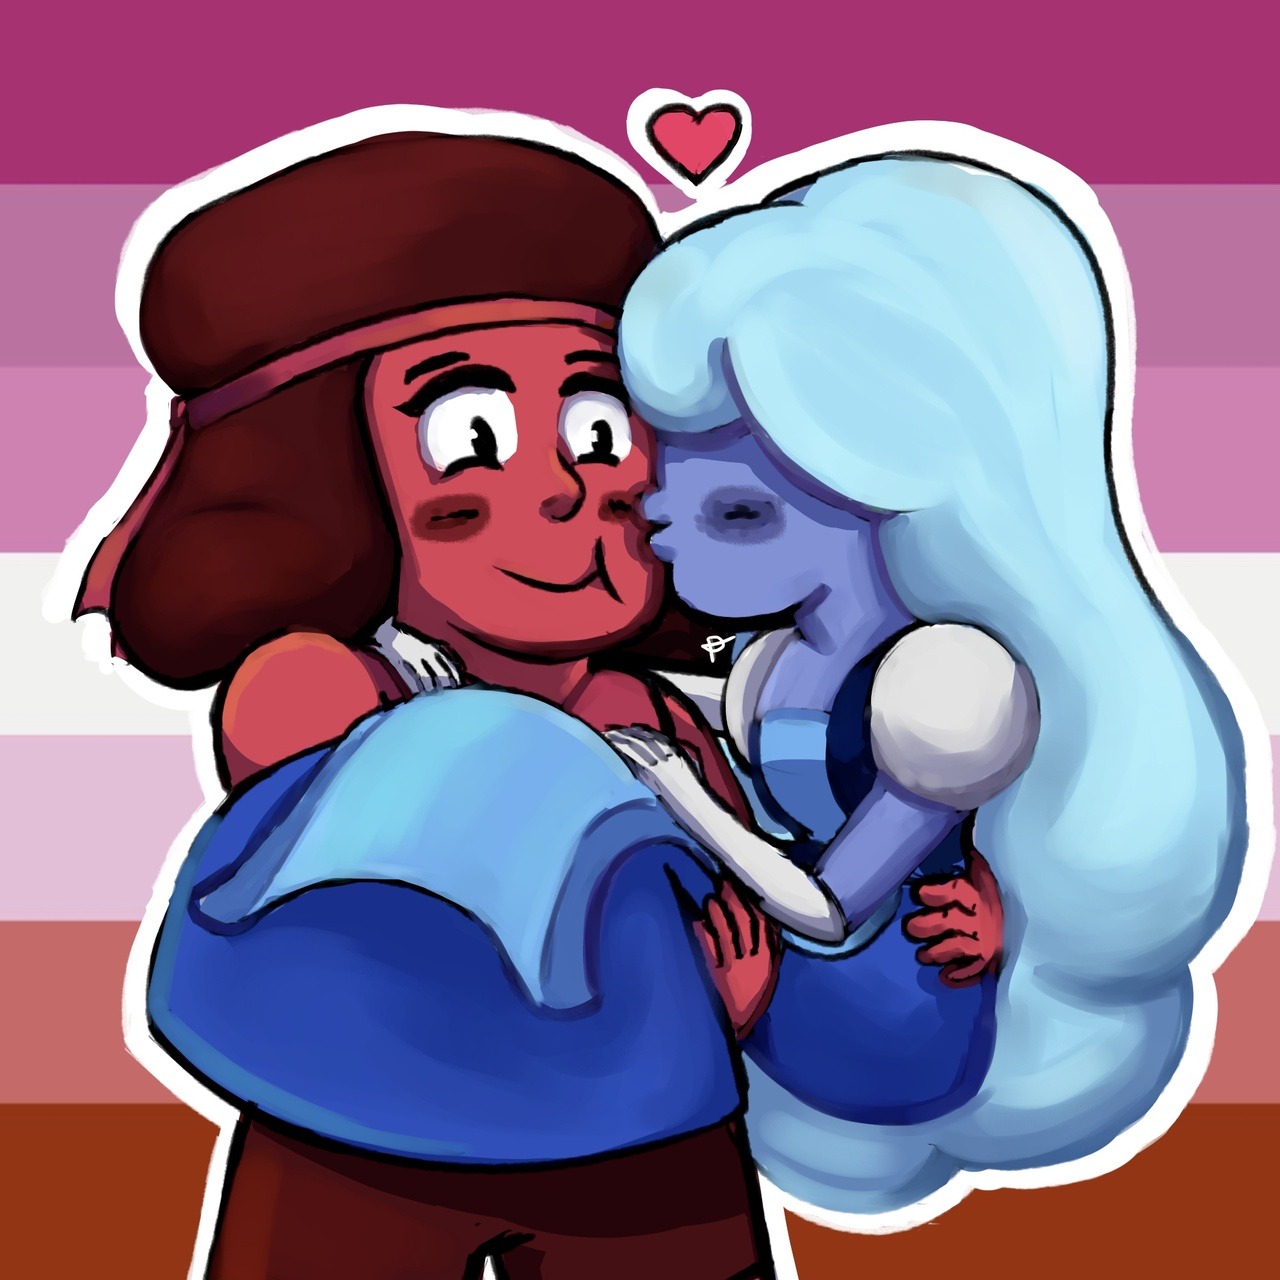 I love Ruby and Sapphire so much so I just had to draw them for pride month! You can use these as icons, but please credit me!